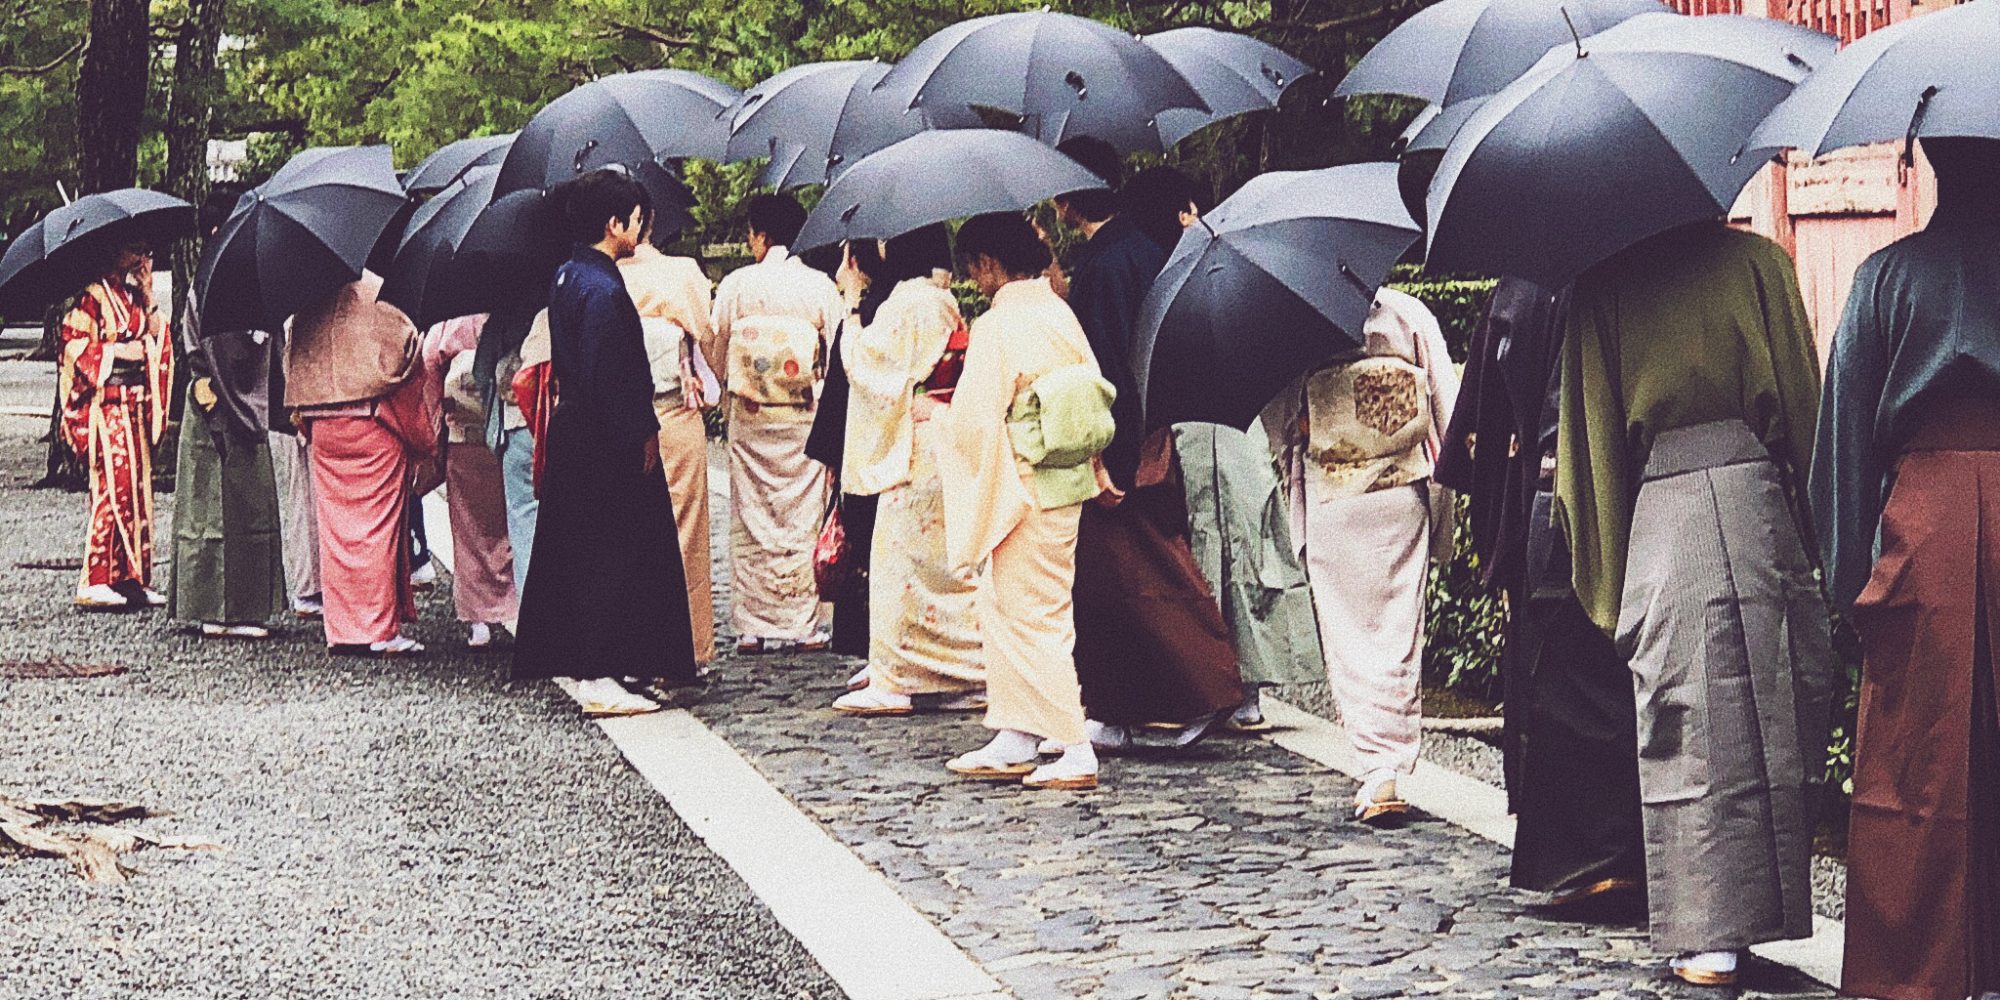 Street filled with geishas with umbrellas